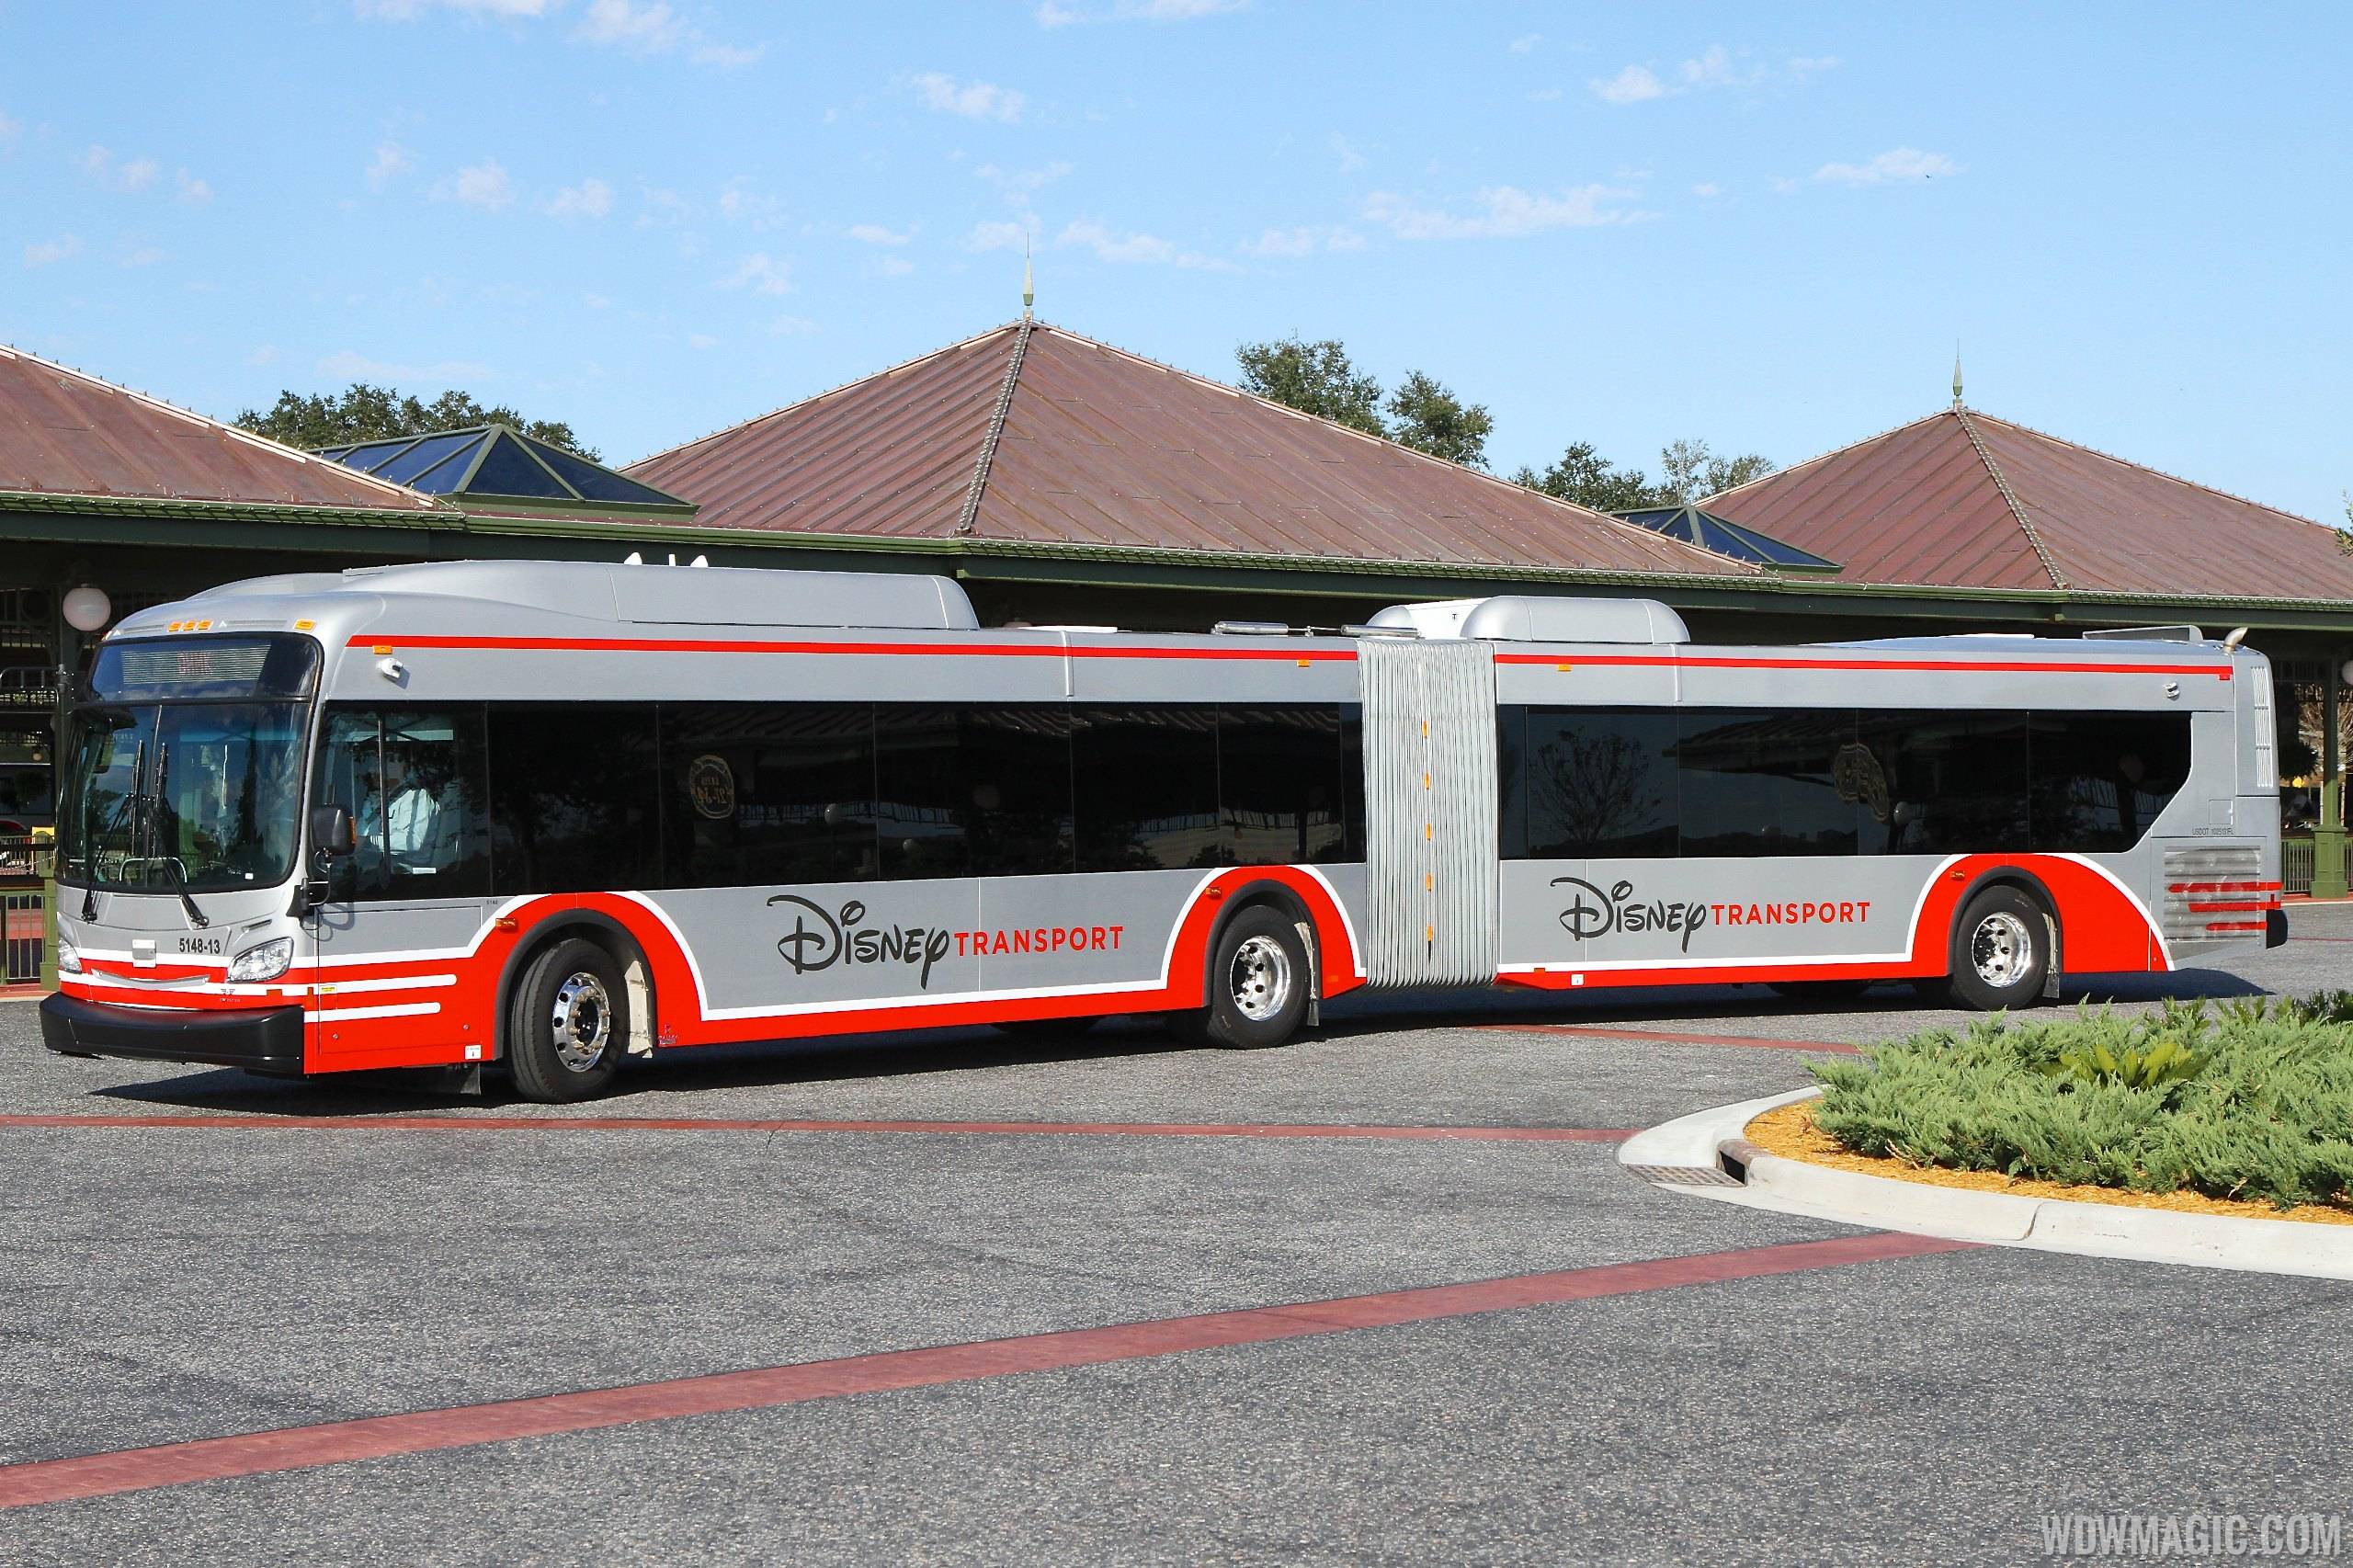 Park to park bus service from Magic Kingdom now relocated from TTC to Magic Kingdom